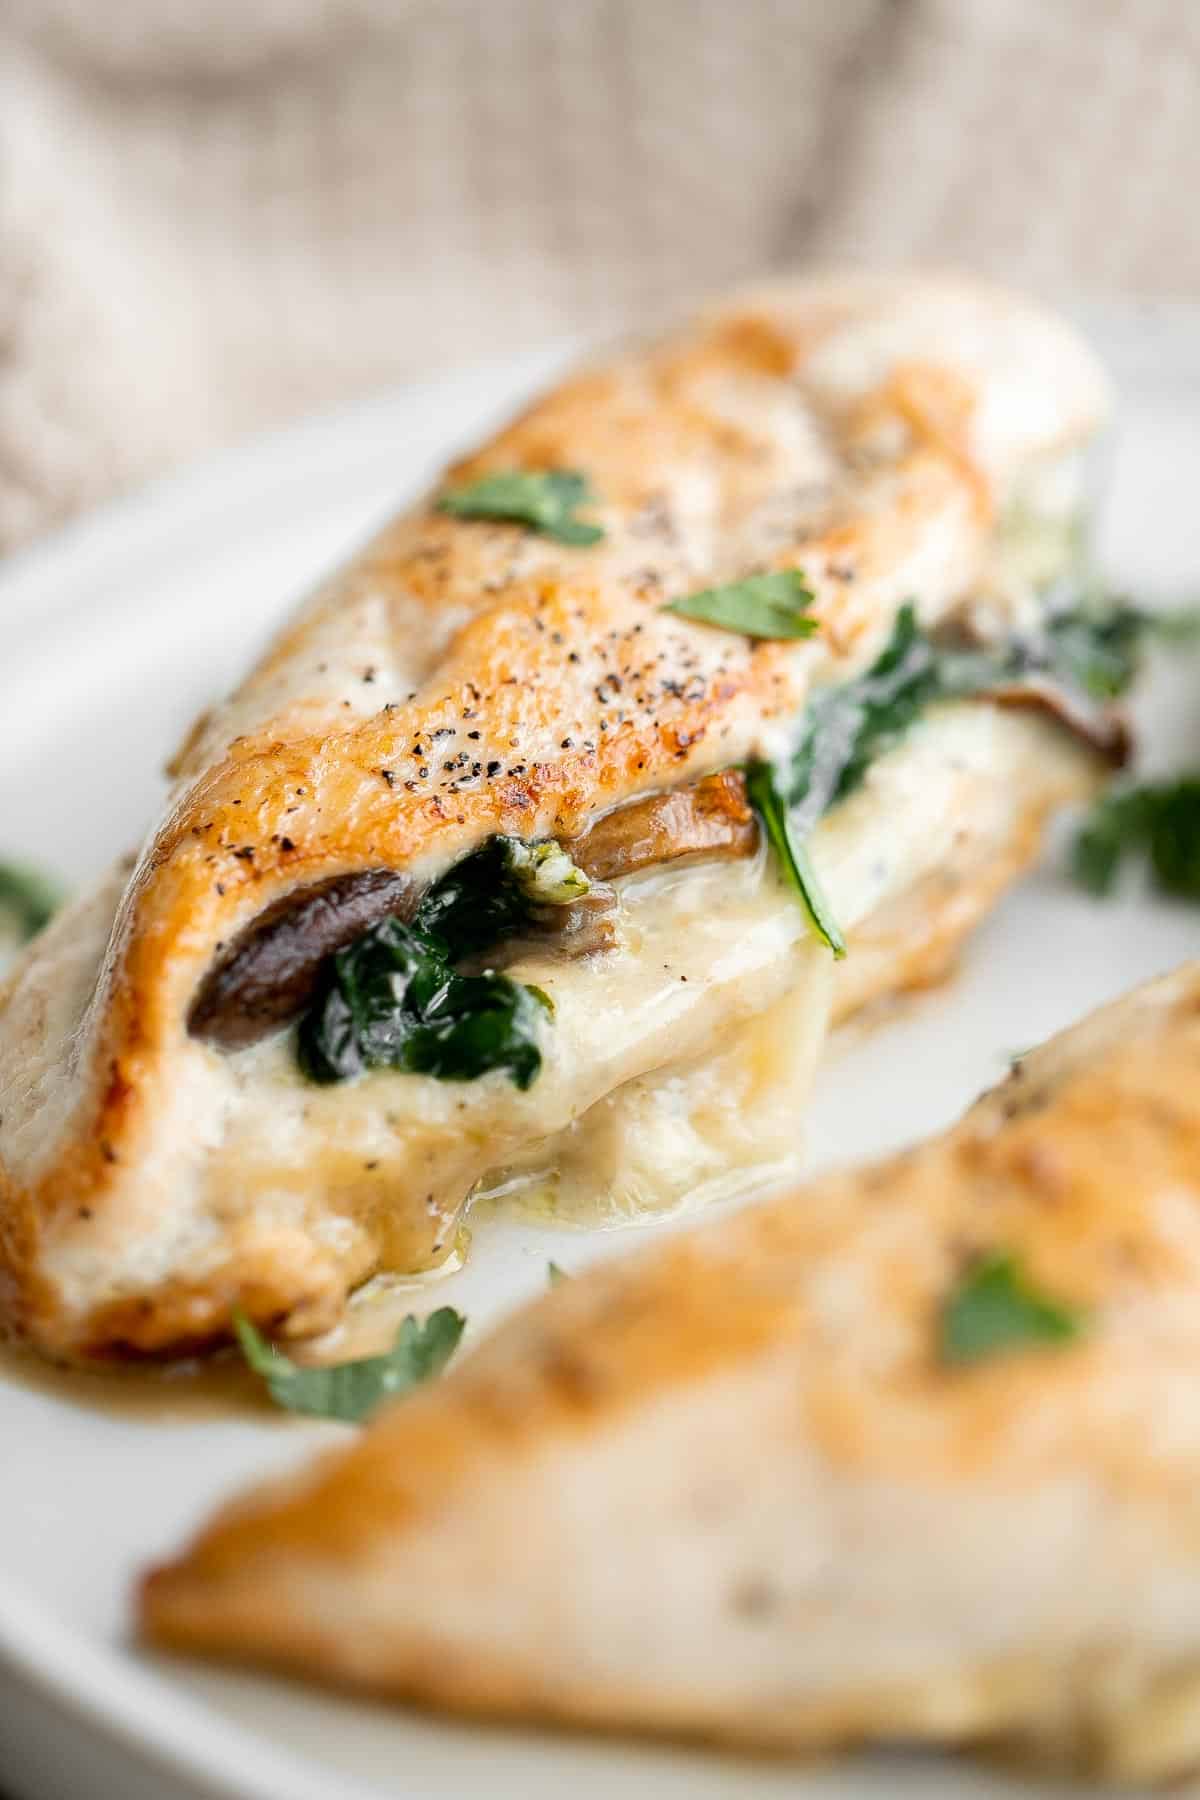 Stuffed Chicken Breasts loaded with mushrooms and spinach are juicy, tender, and flavorful. A handful of simple ingredients transforms regular chicken. | aheadofthyme.com